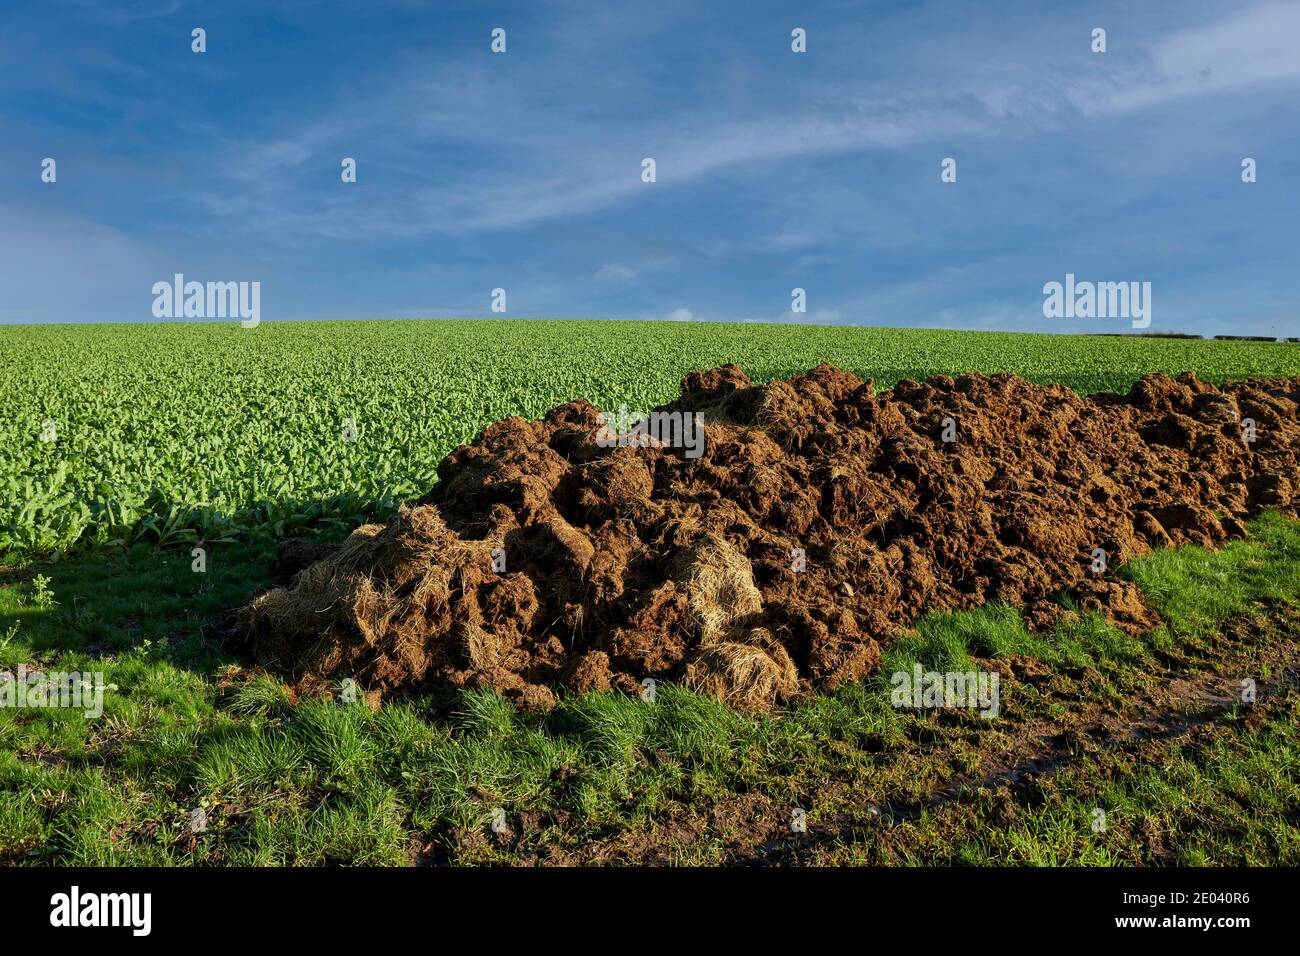 Heap of Manure in field ready for Spreading Stock Photo